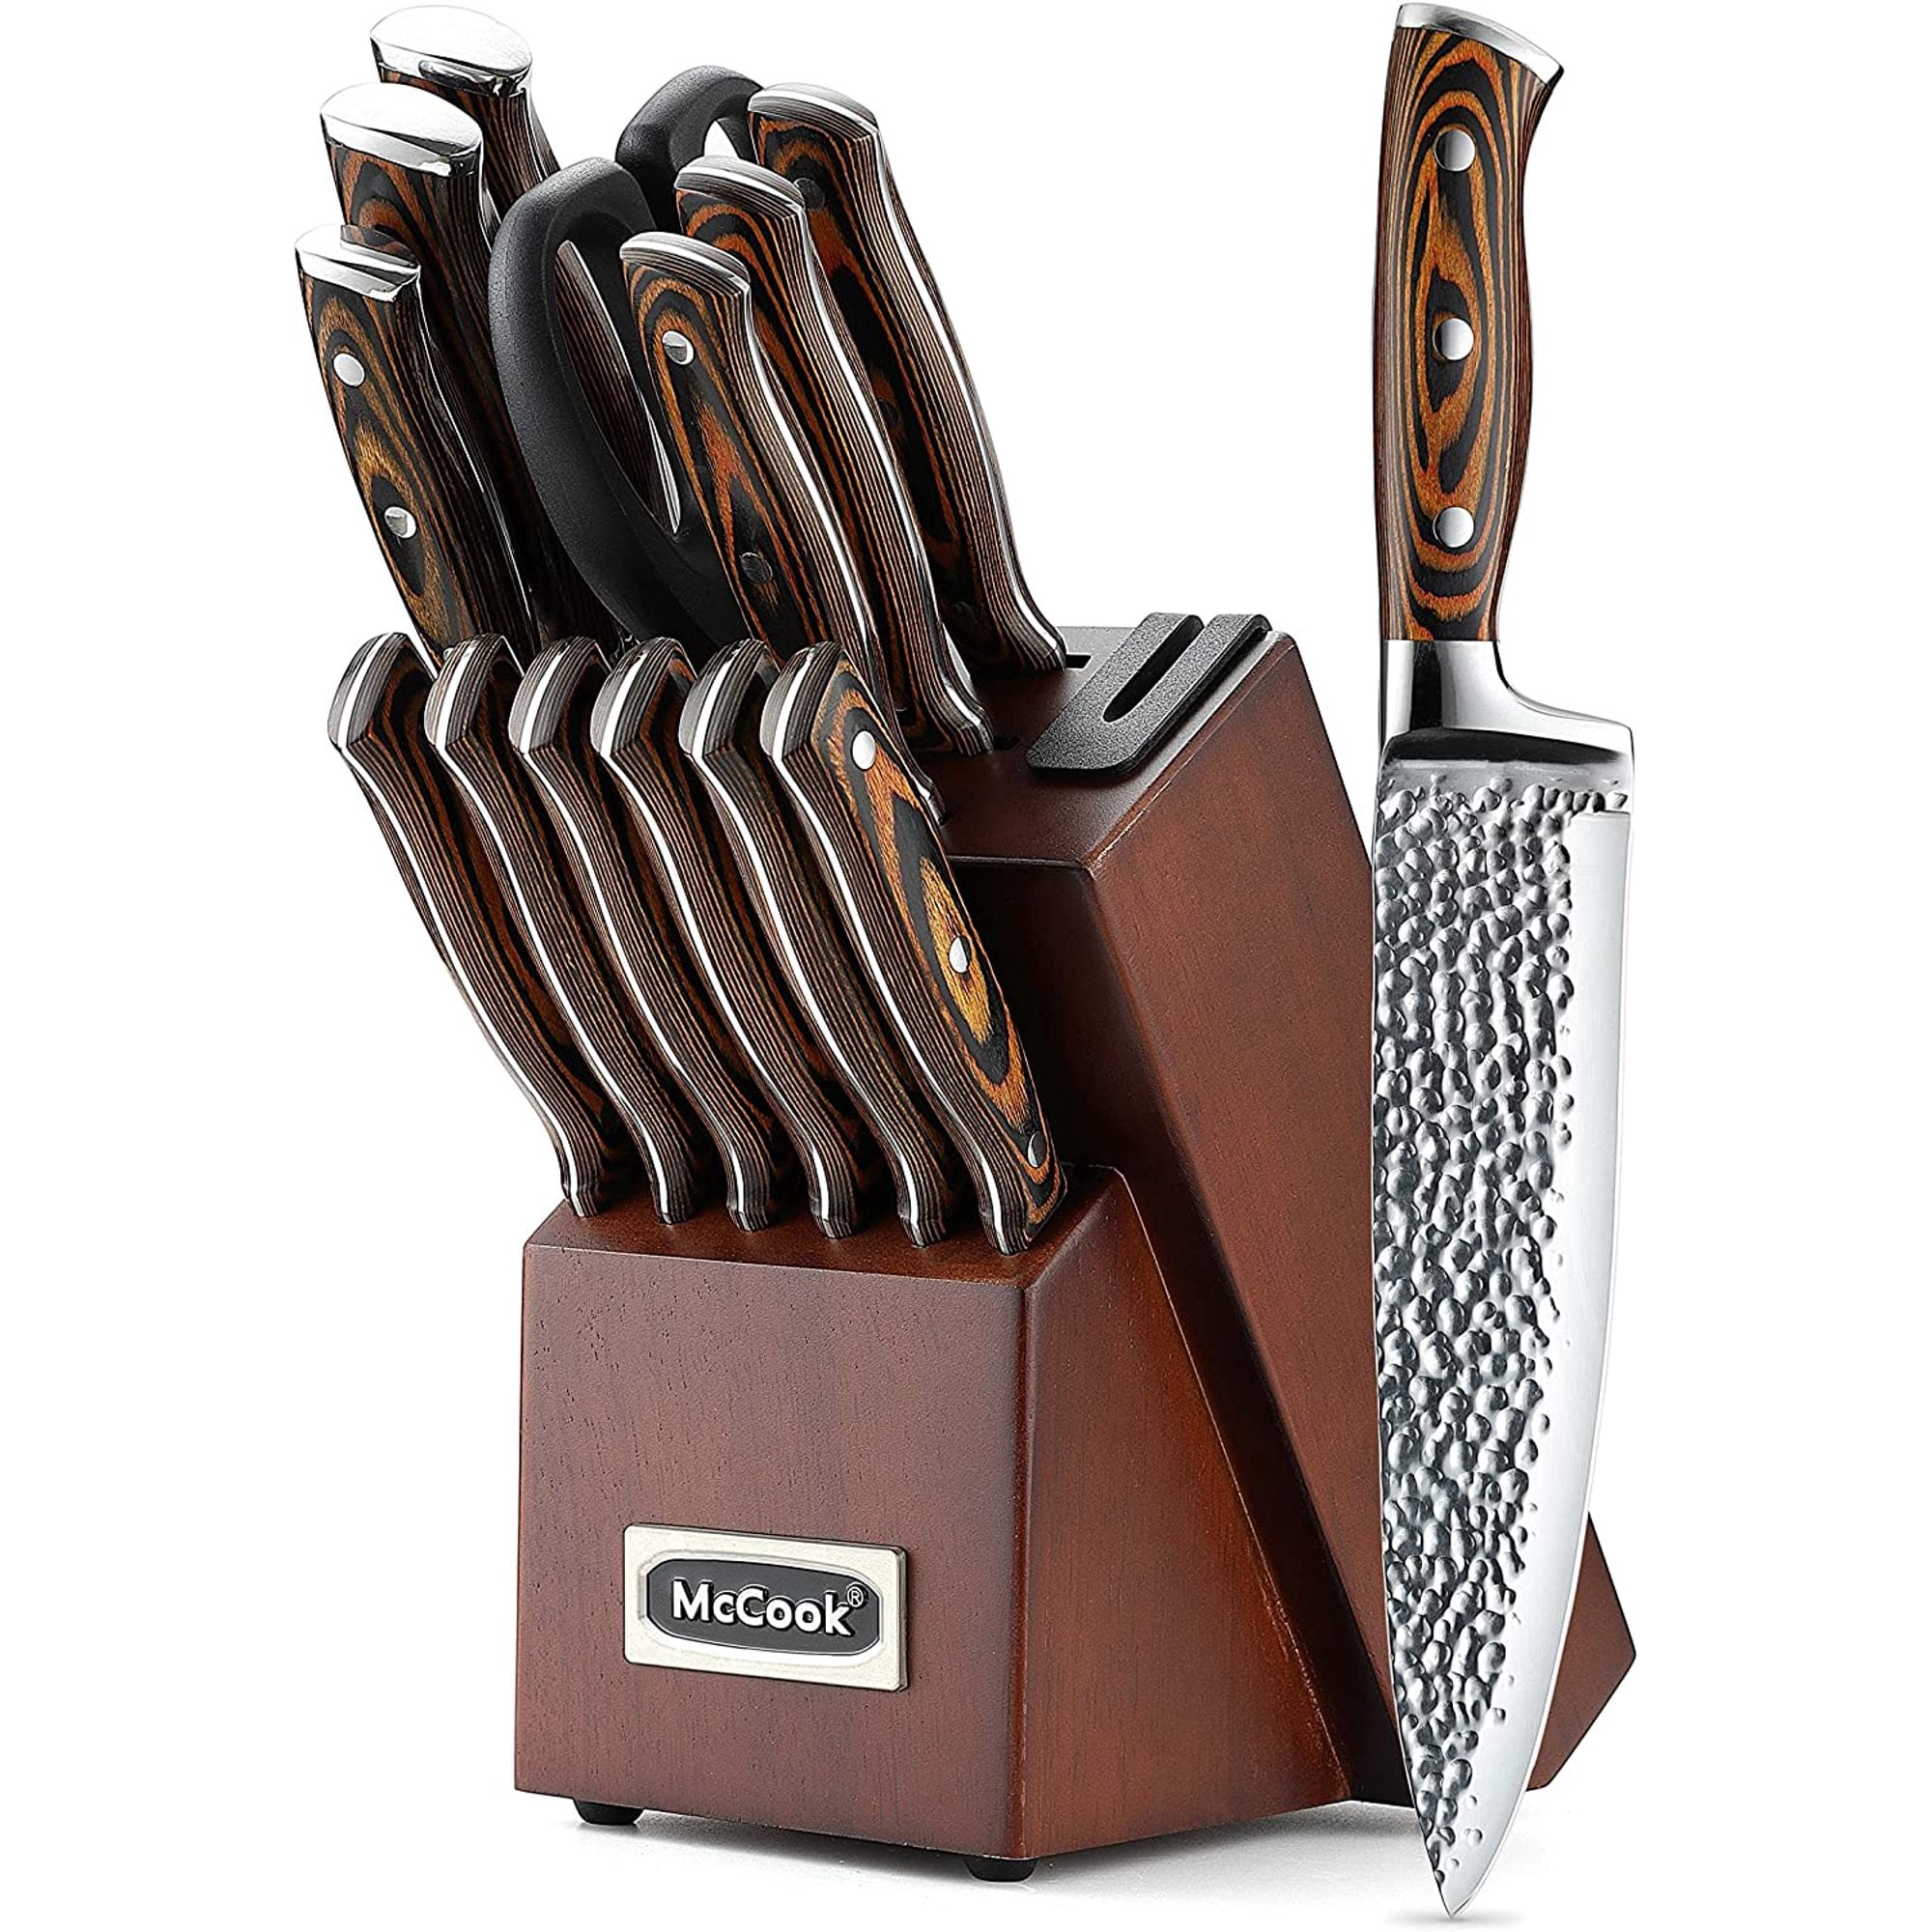 Stainless Steel Knife Set with Block - 13 Kitchen Knives Set Chef Knife Set  with Knife Sharpener, 6 Steak Knives, Bonus Peeler Scissors Cheese Pizza  Knife and Acrylic Stand by Home Hero - Shop - TexasRealFood